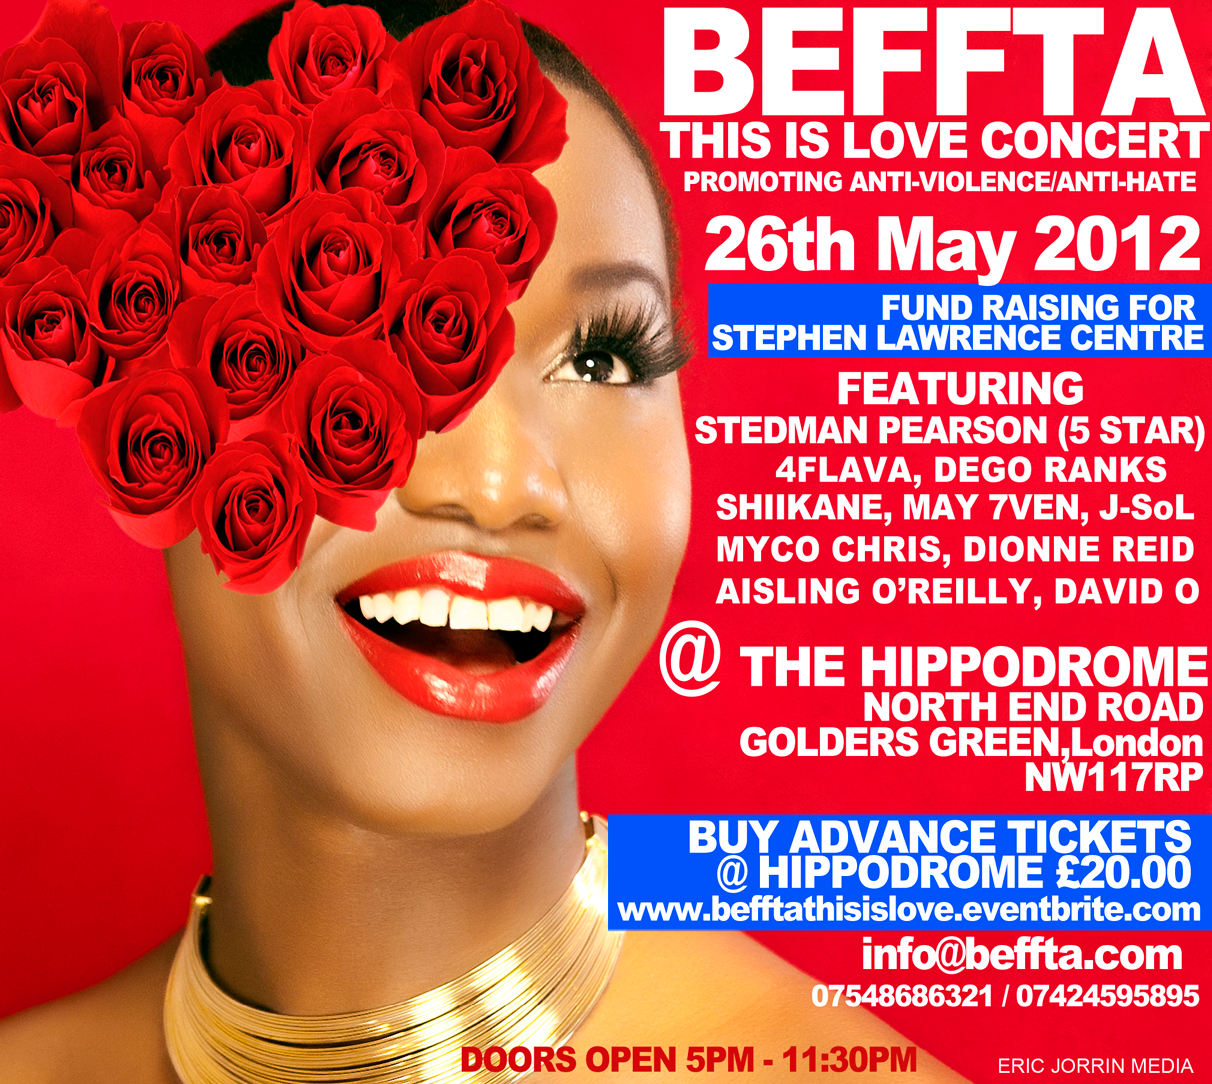 BEFFTA THIS IS LOVE CONCERT is on 26th May at The Hippodrome, Golders Green. All money raised will be donated to THE STEPHEN LAWRENCE CENTRE